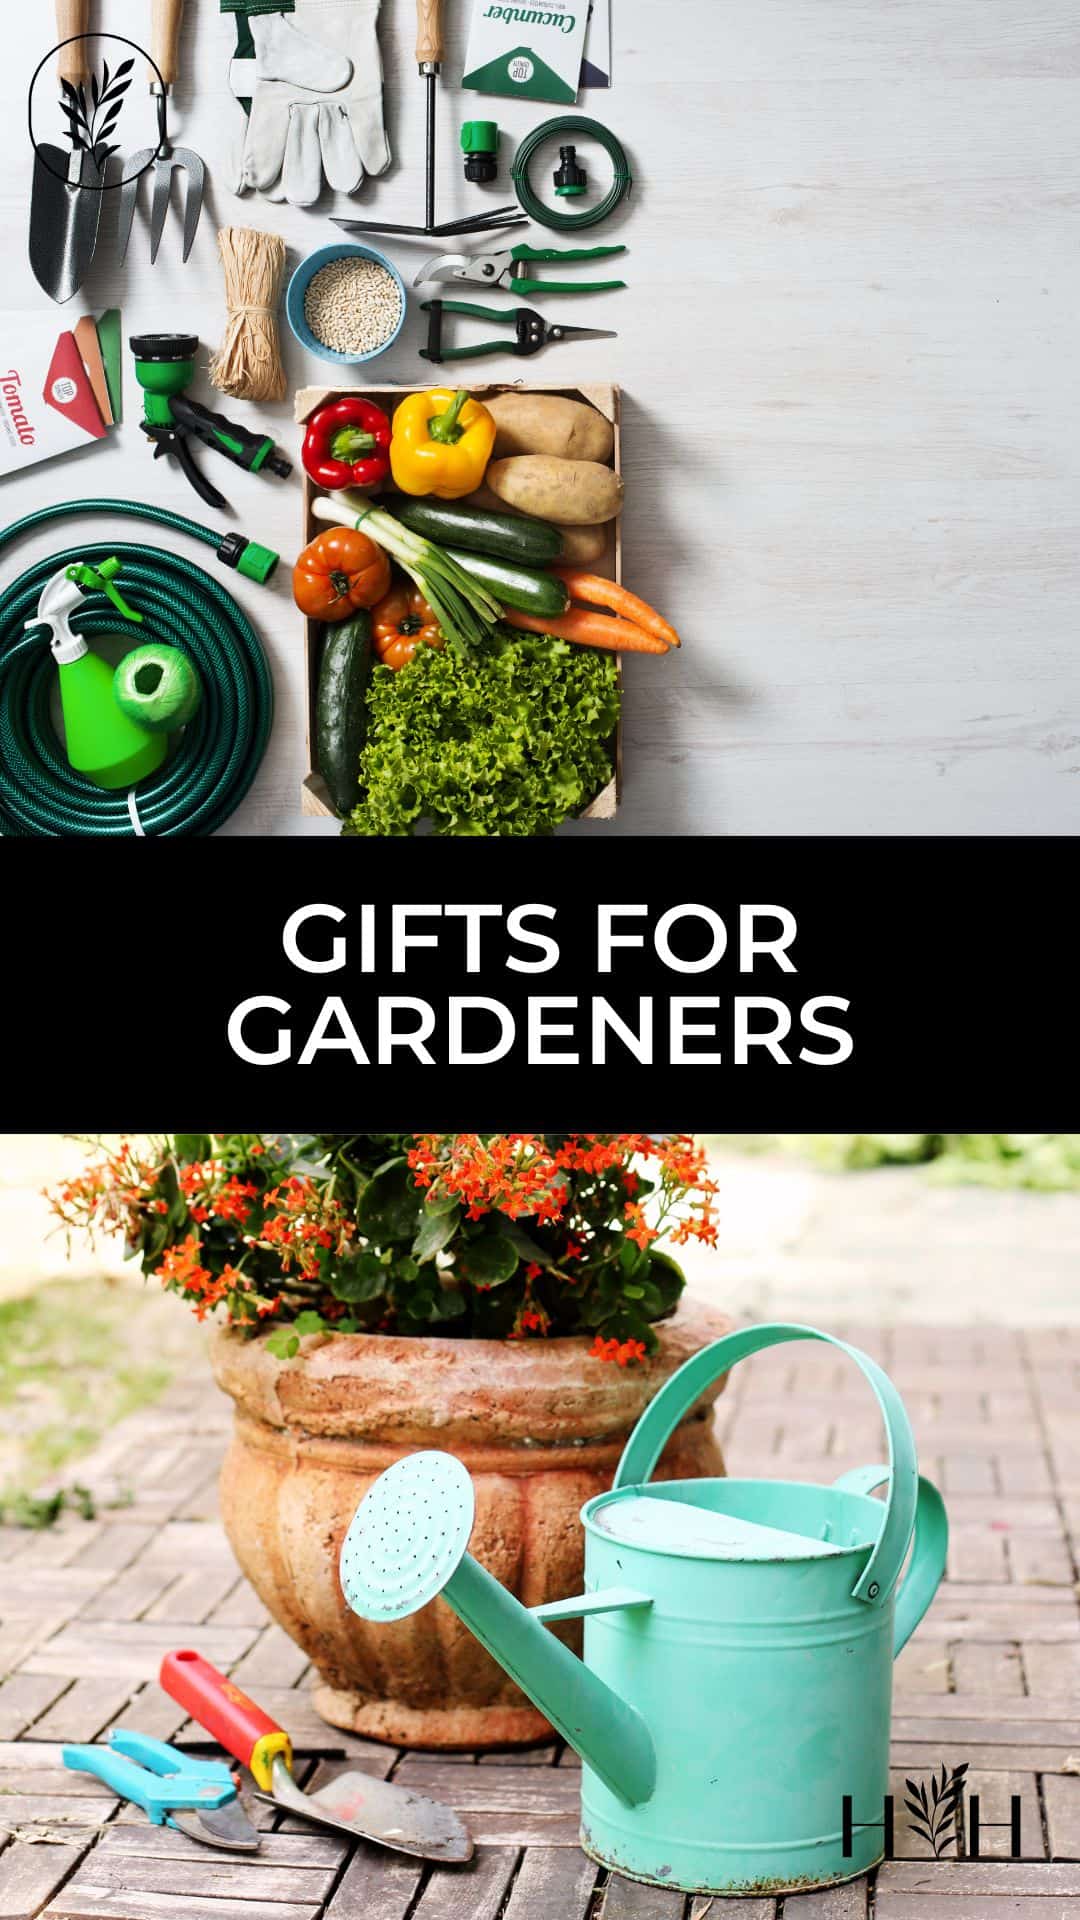 Gifts for gardeners via @home4theharvest